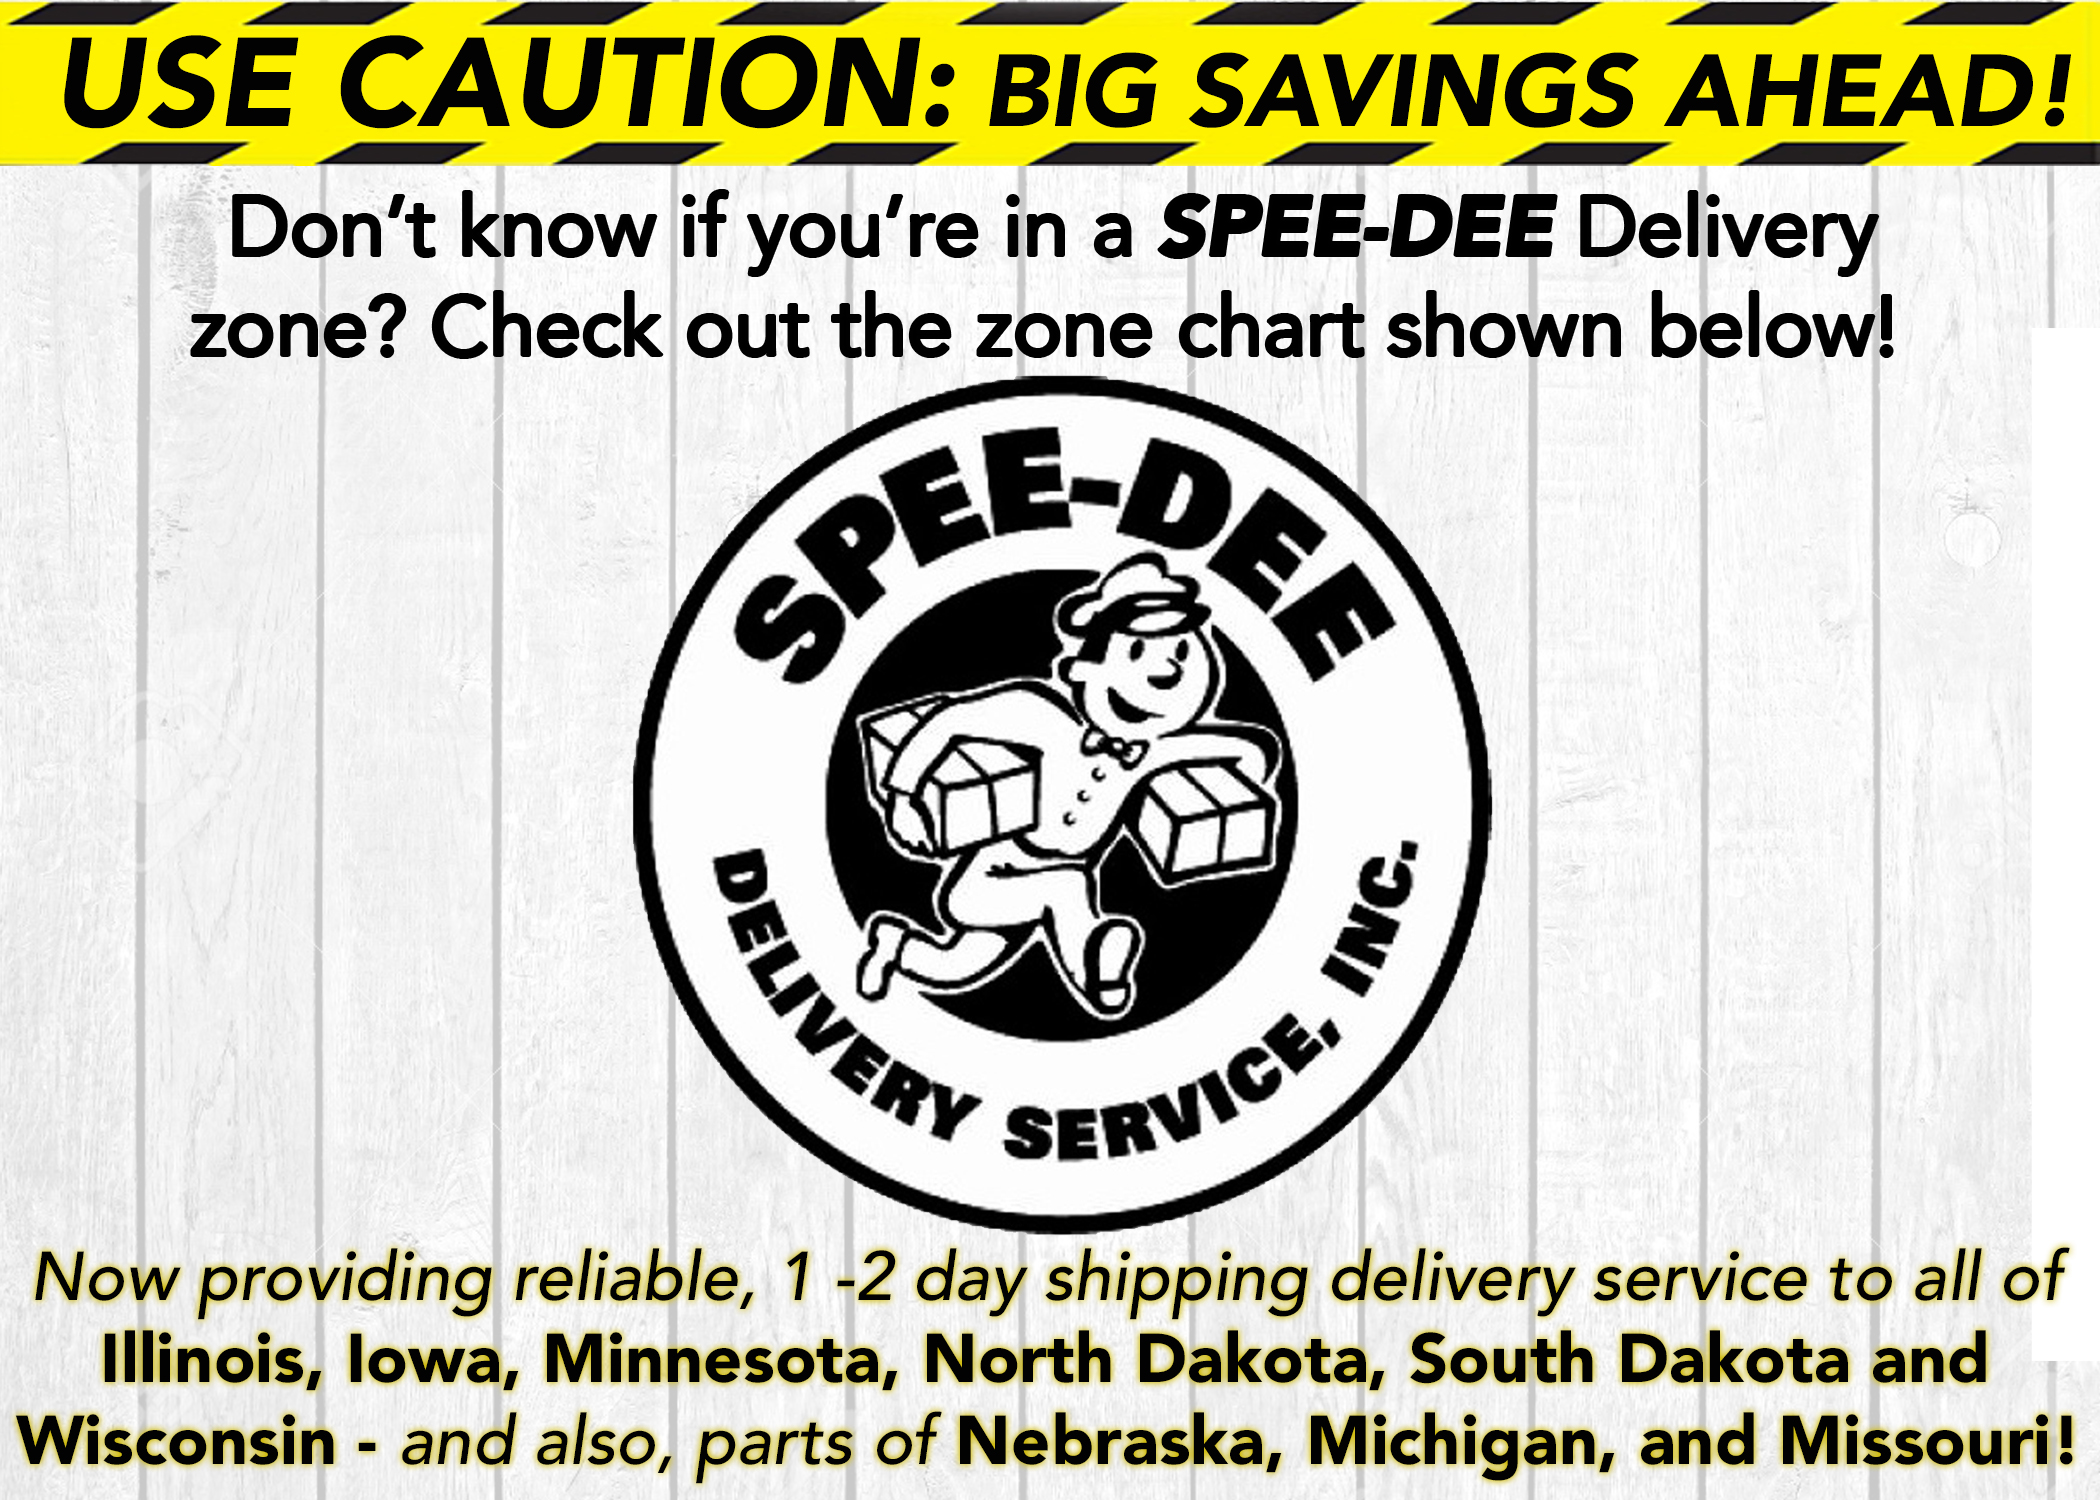 Speedee Delivery to 7-States!!